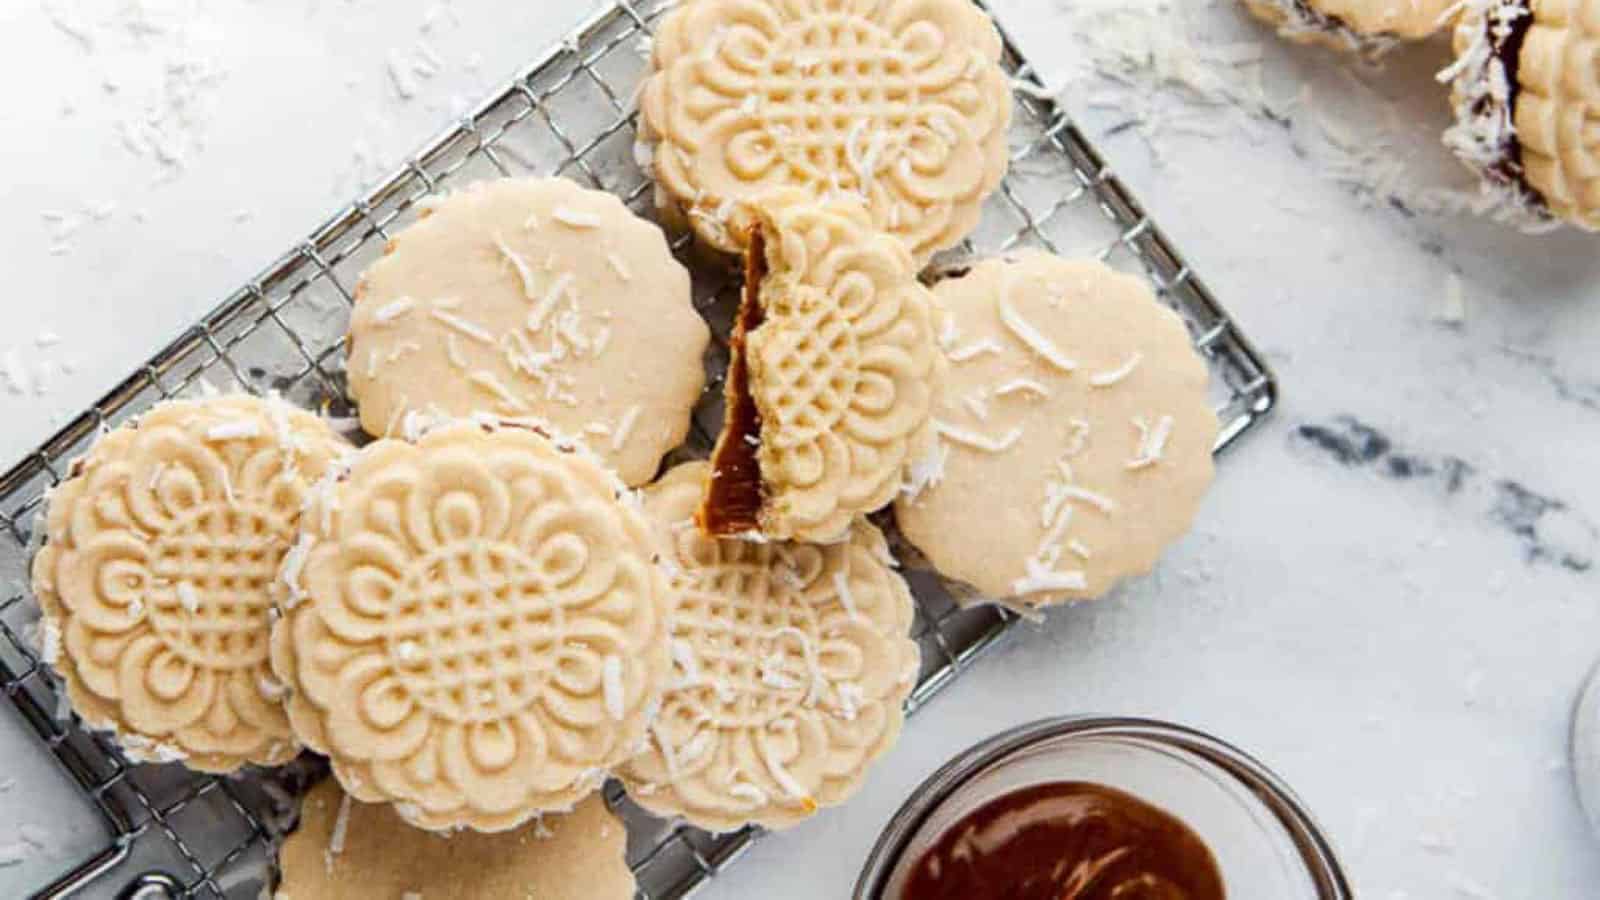 13 Craveable Desserts Anyone Can Make